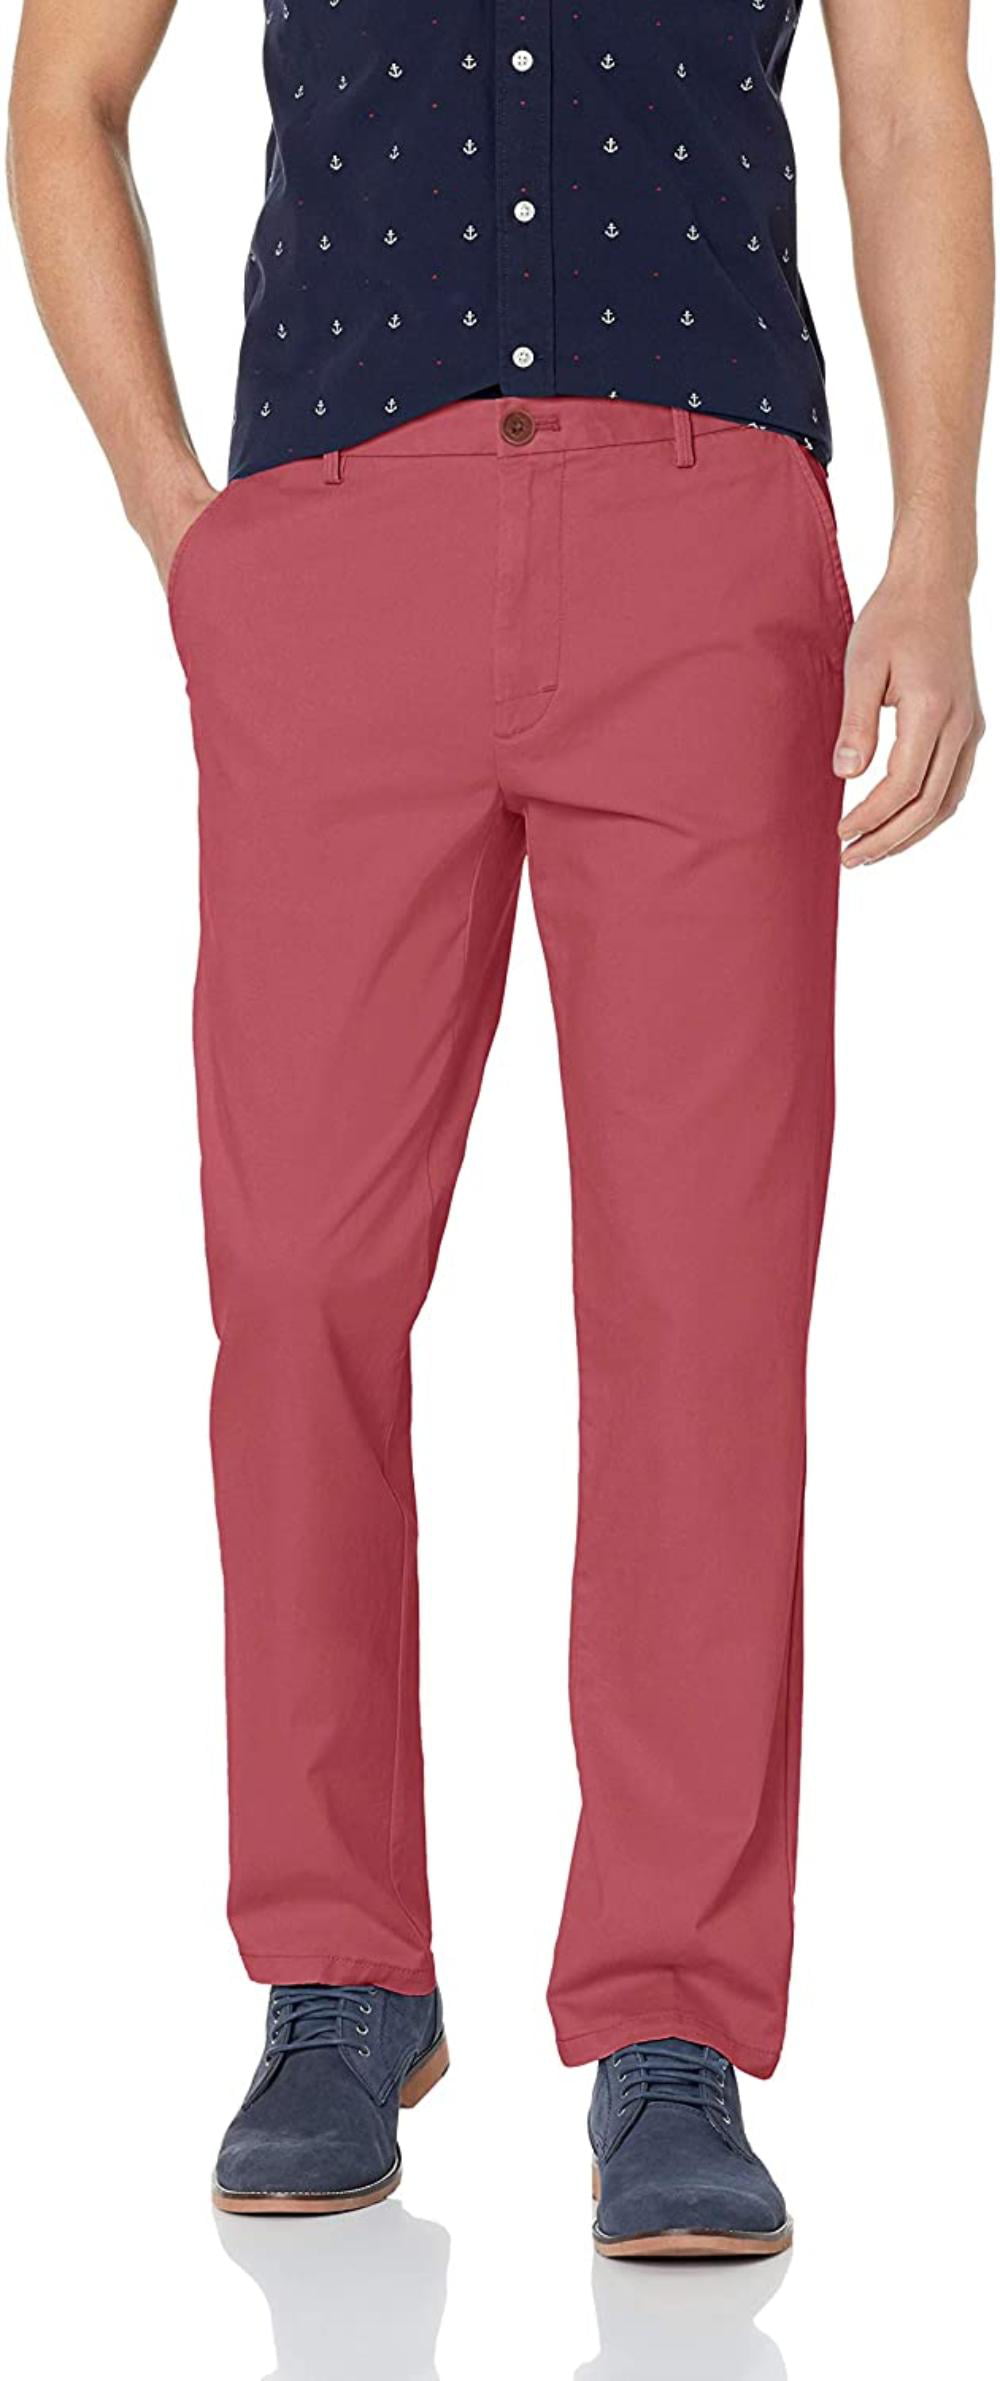 IZOD Men's Stretch Chino With Sportflex Straight pants Flat front Saltwater Red 